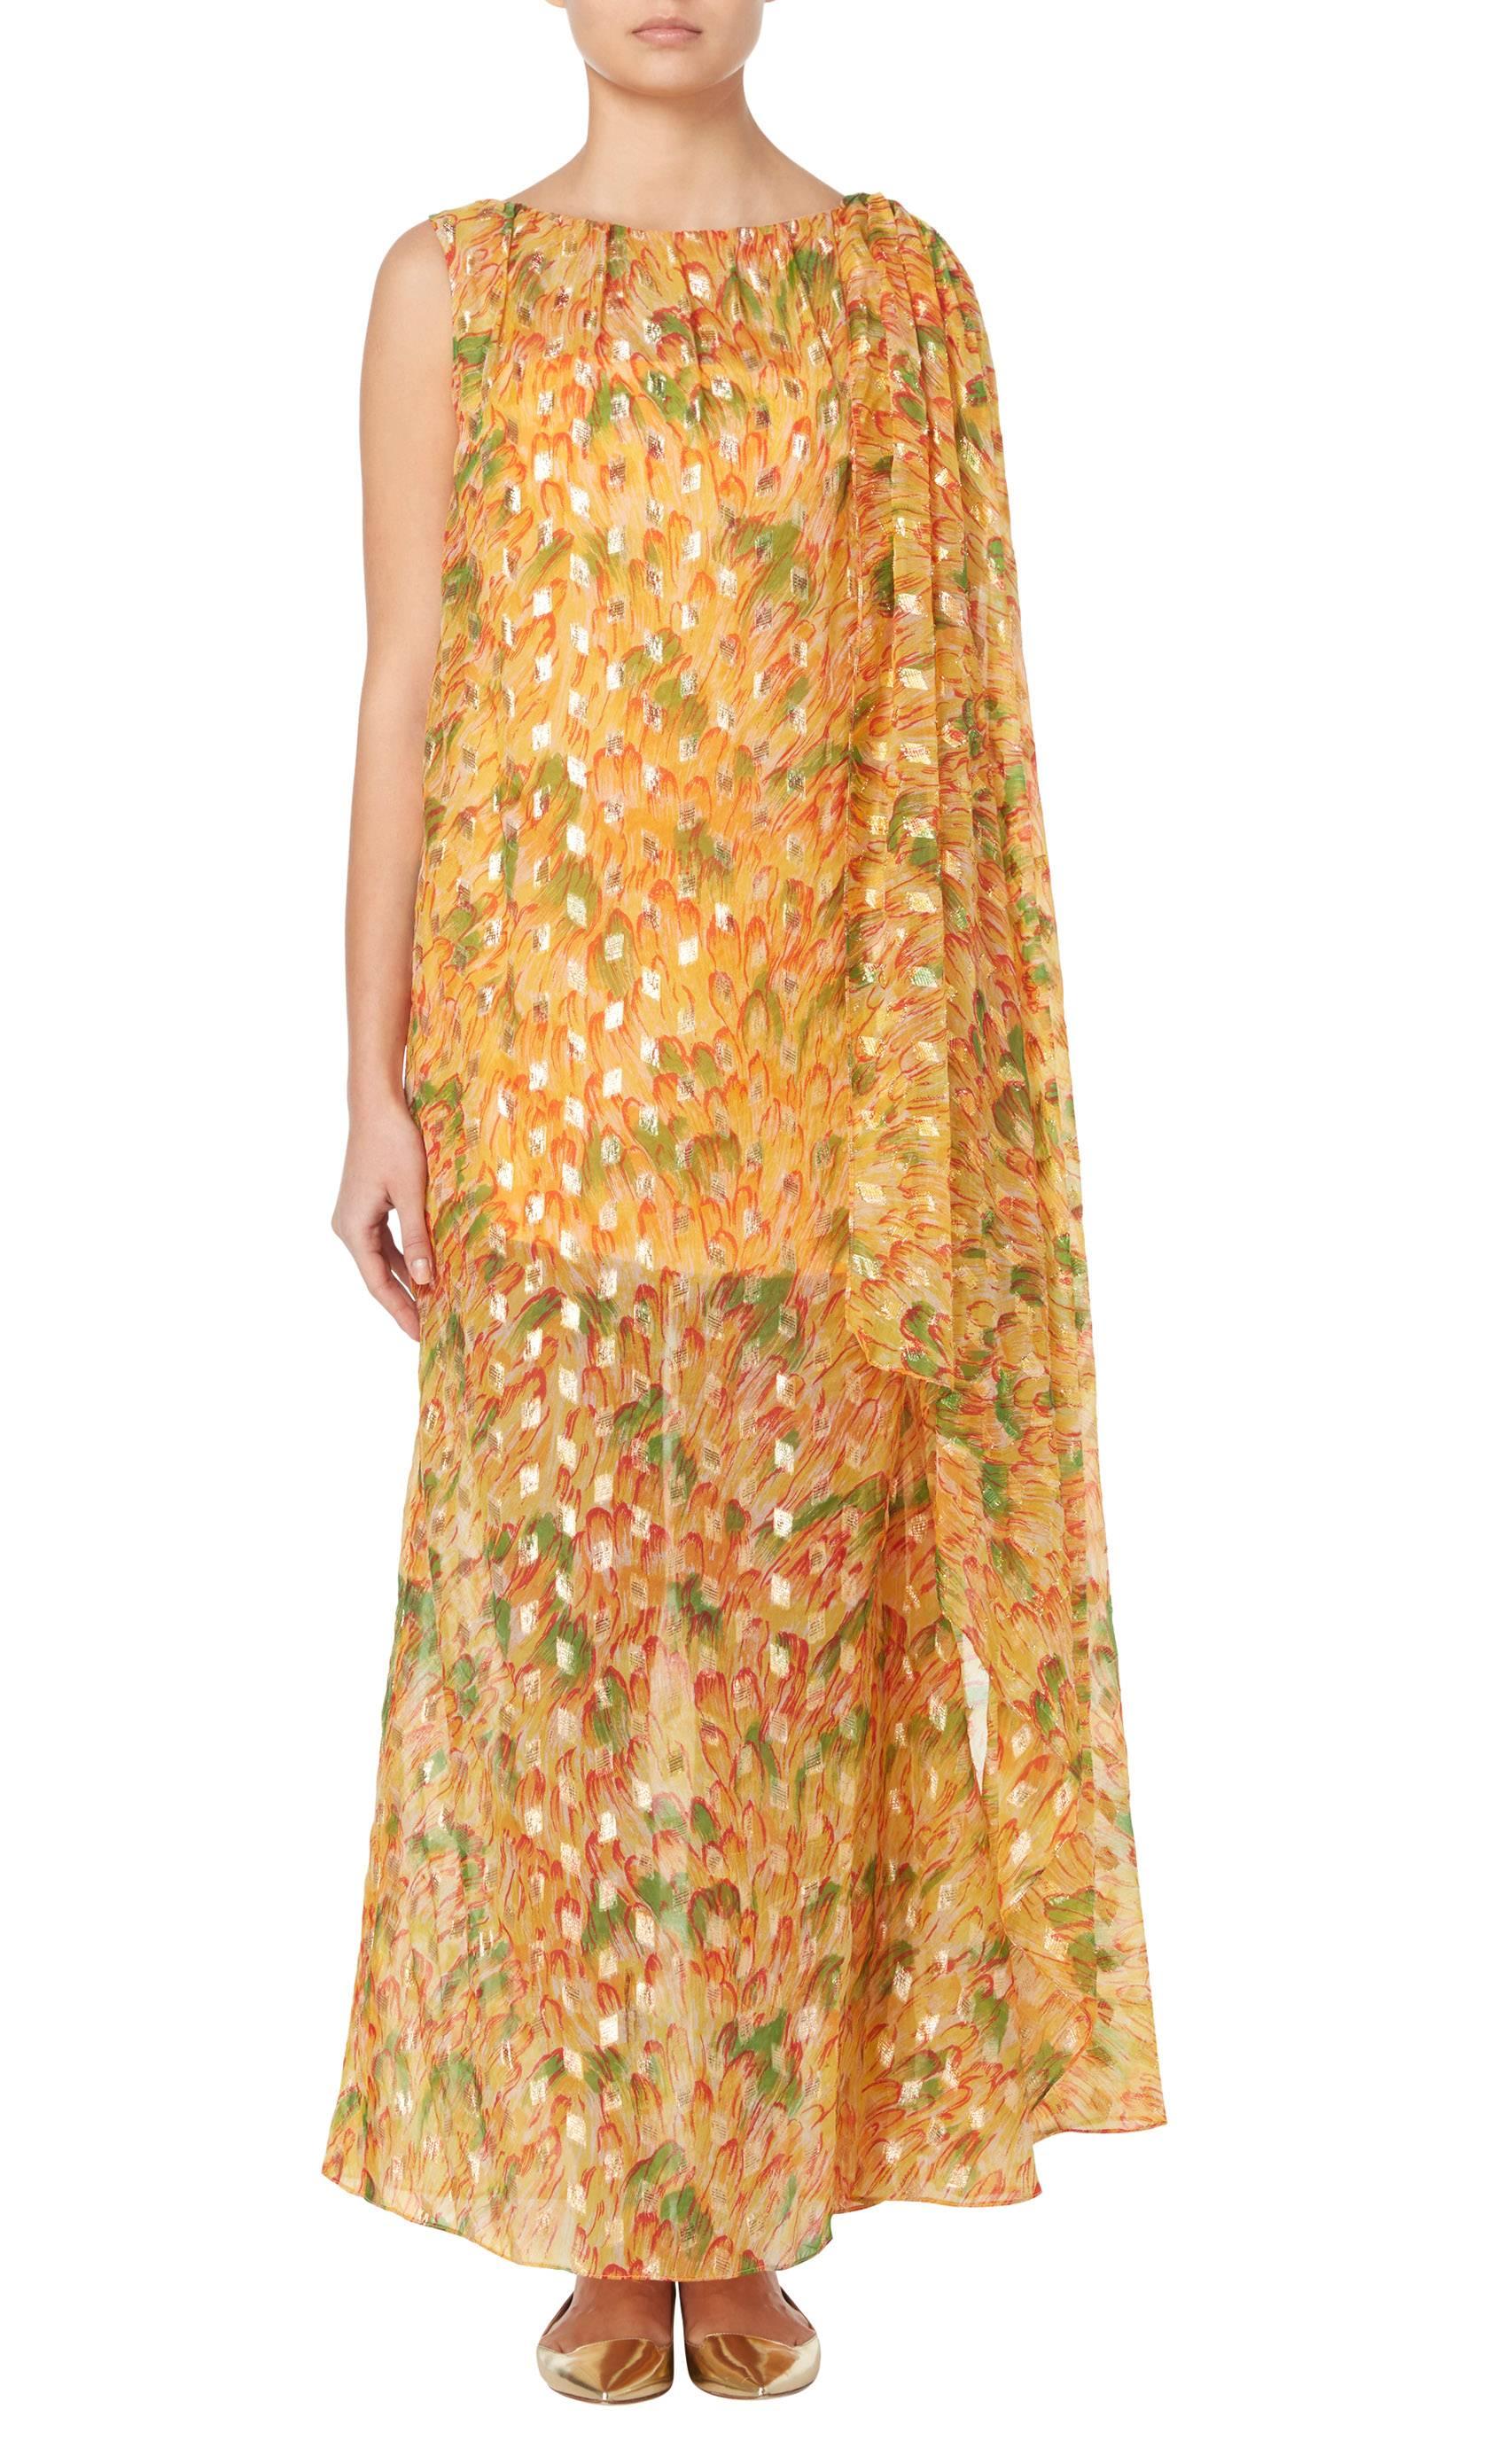 This metallic Malcolm Starr maxi dress is ideal for pool parties or sunset cocktails. Constructed in sheer orange, green and red printed synthetic chiffon, and shot though with gold metallic thread which sparkles in the light, the dress has a half